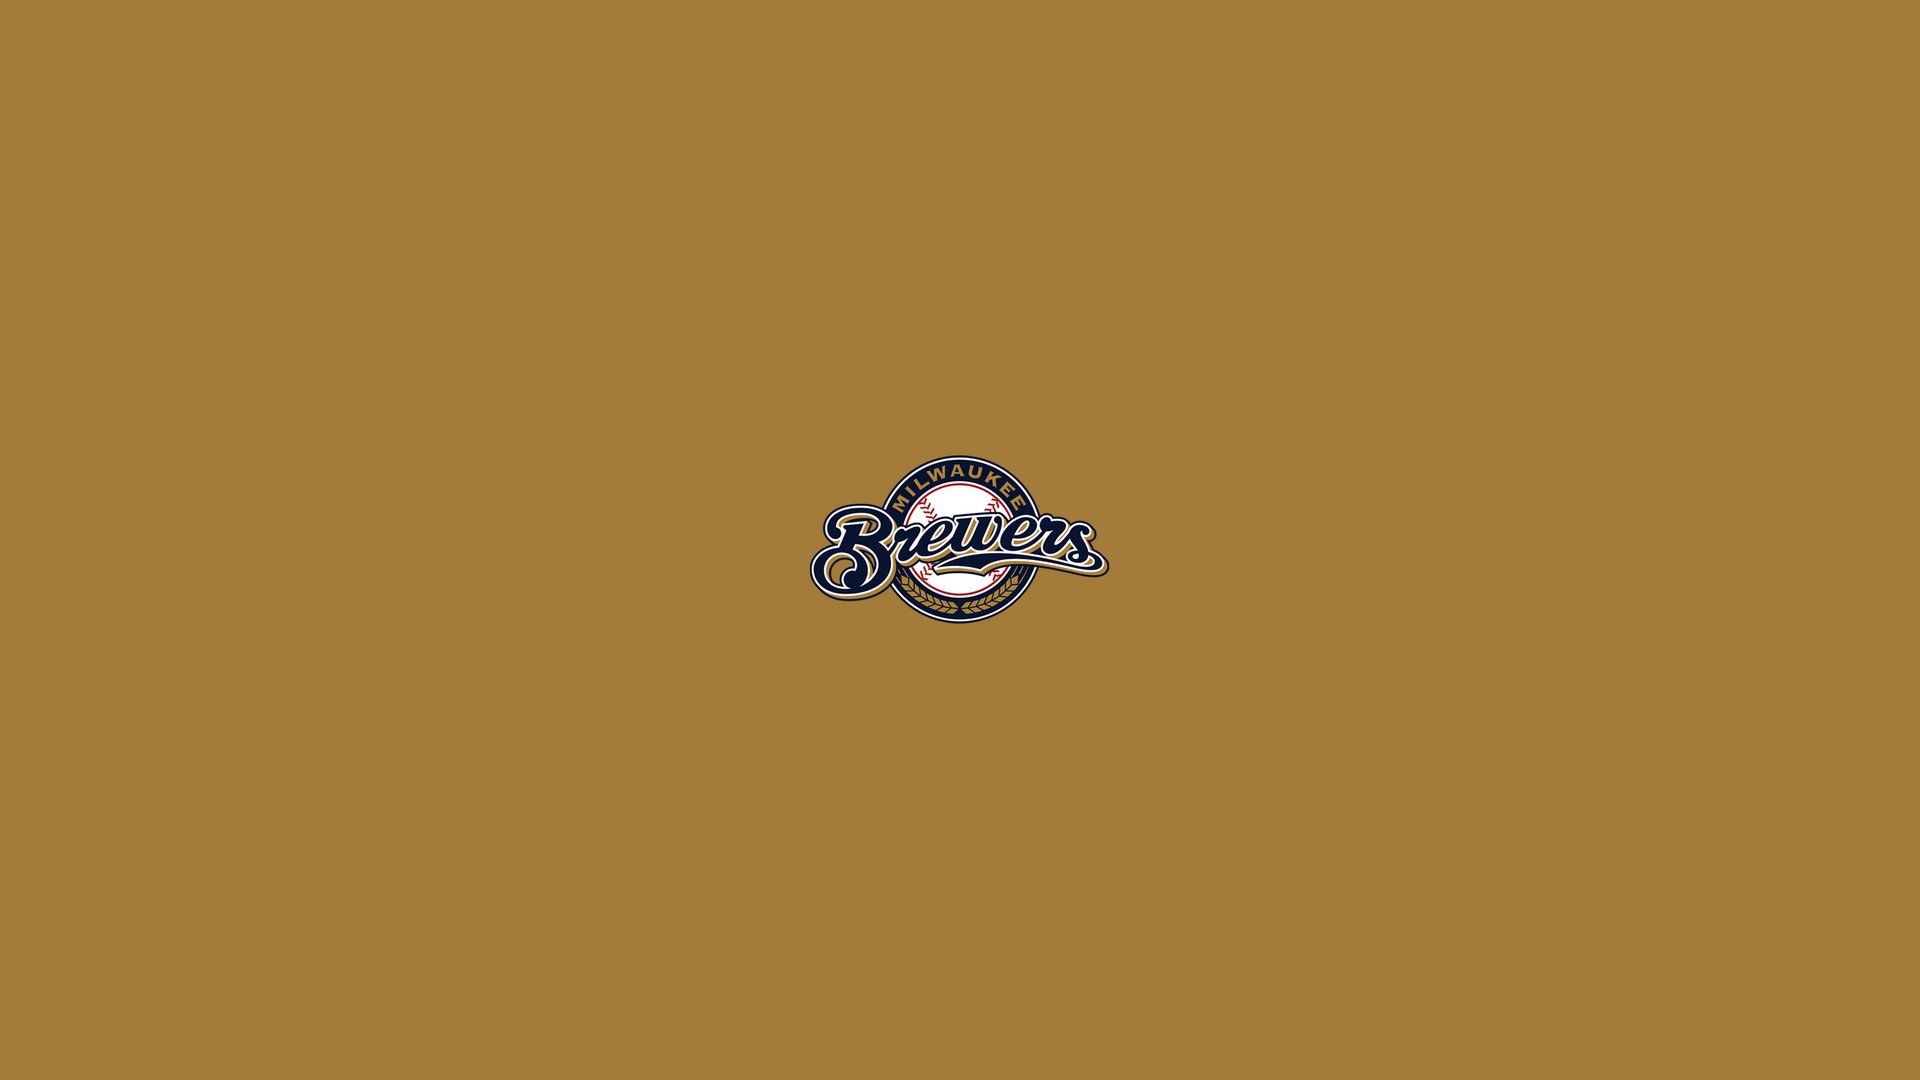 Milwaukee Brewers MLB Laptop Wallpaper With high-resolution 1920X1080 pixel. You can use this wallpaper for Mac Desktop Wallpaper, Laptop Screensavers, Android Wallpapers, Tablet or iPhone Home Screen and another mobile phone device